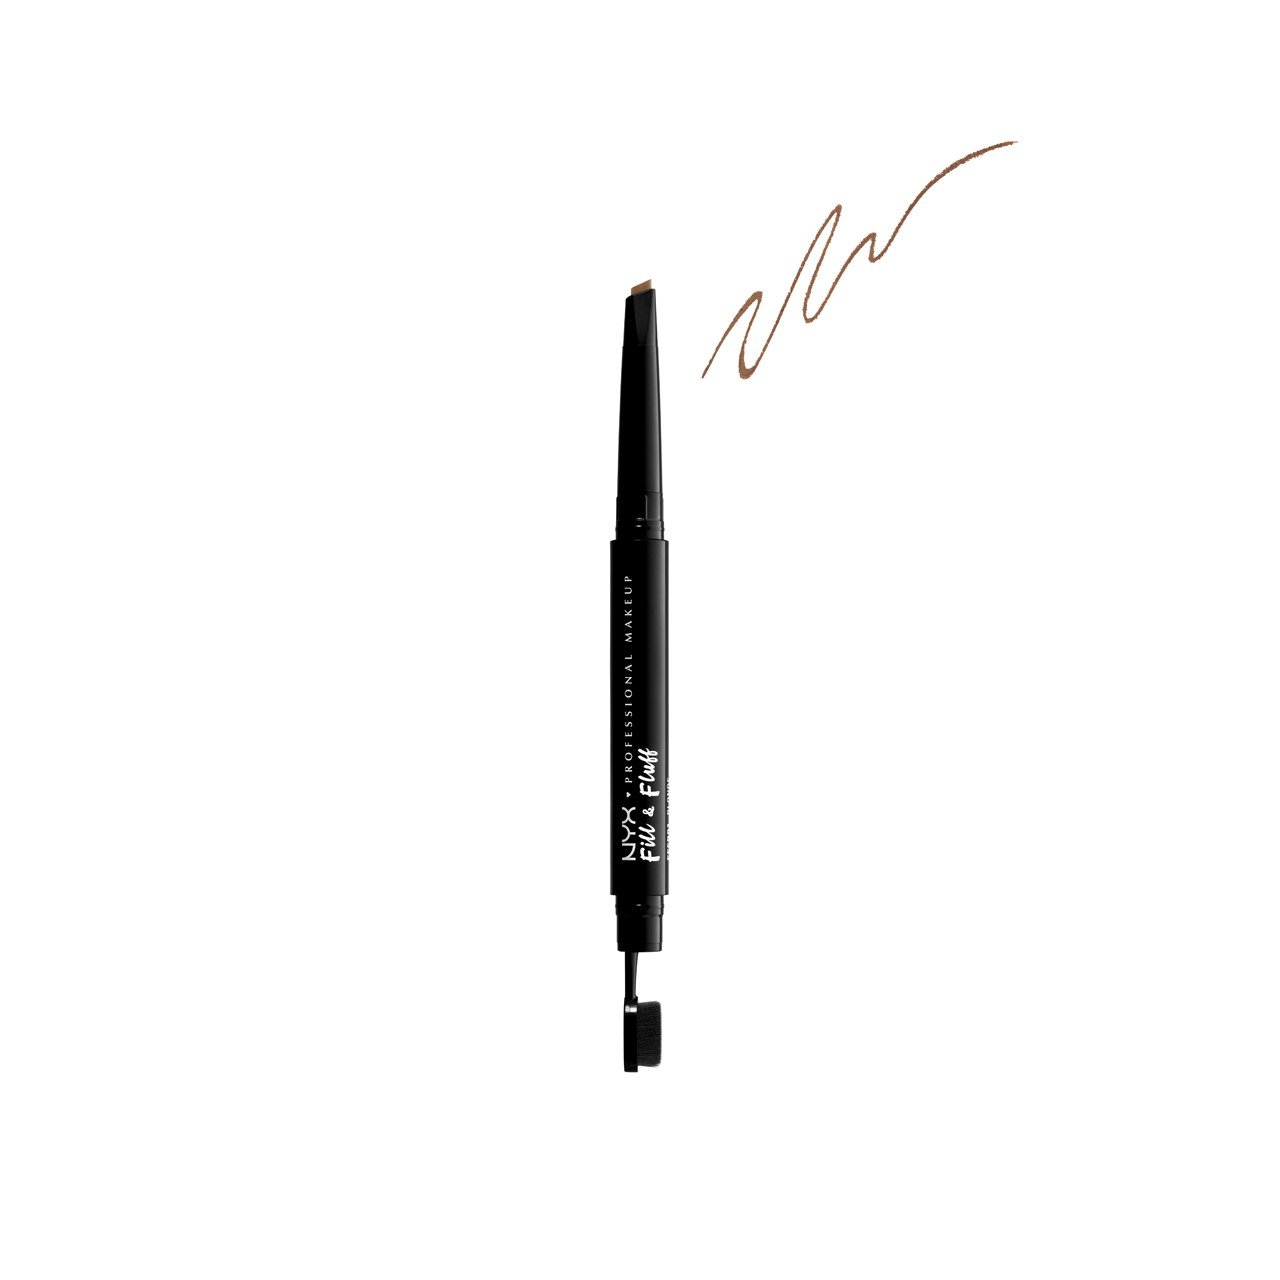 NYX Pro Makeup Fill & Fluff Eyebrow Pomade Pencil Taupe 0.2g (0.01oz)